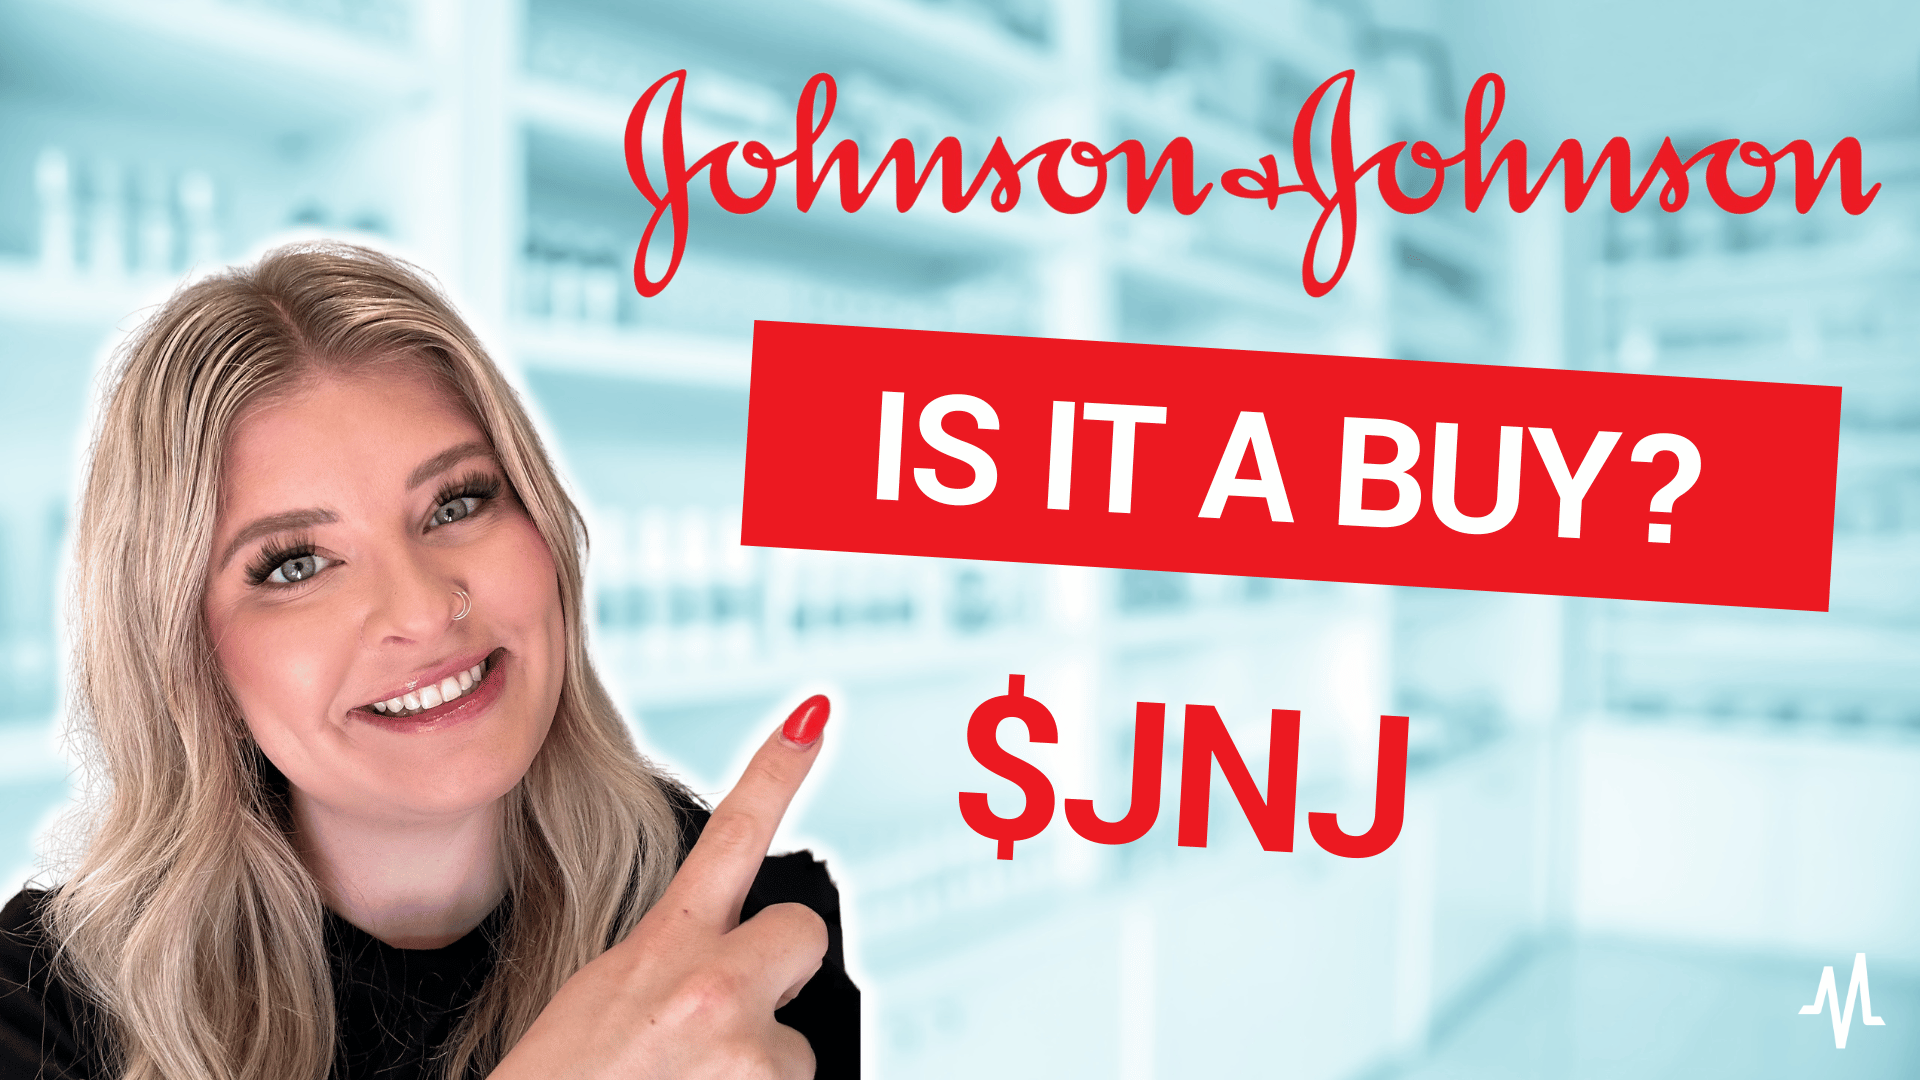 Is Johnson & Johnson a Buy in This Market?